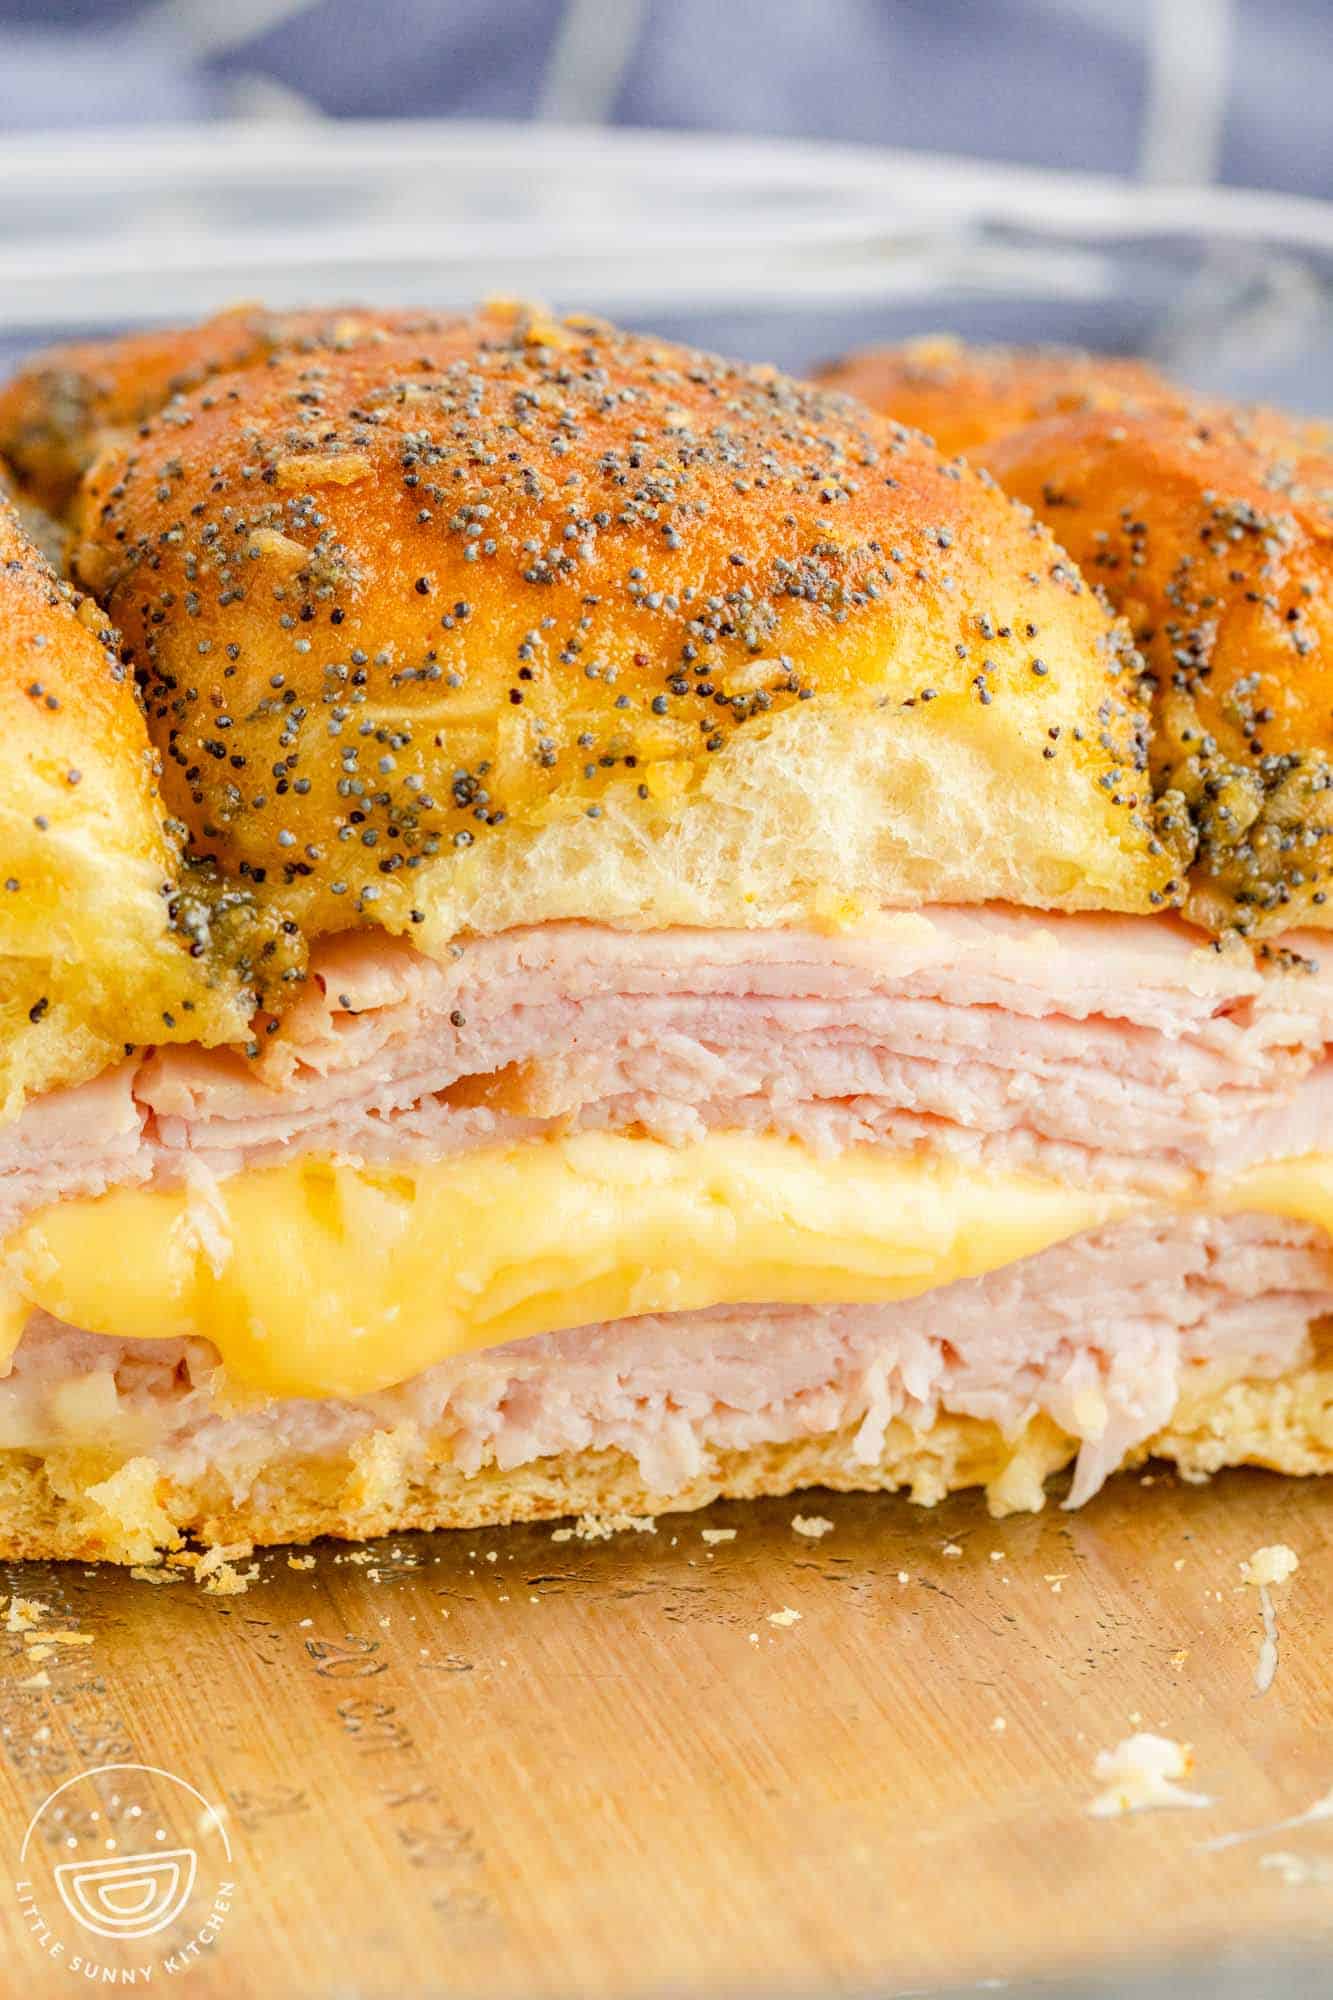 A side view of a pan of turkey and cheese sliders on hawaiian rolls. The havarti cheese is melty in between layers of thinly sliced turkey